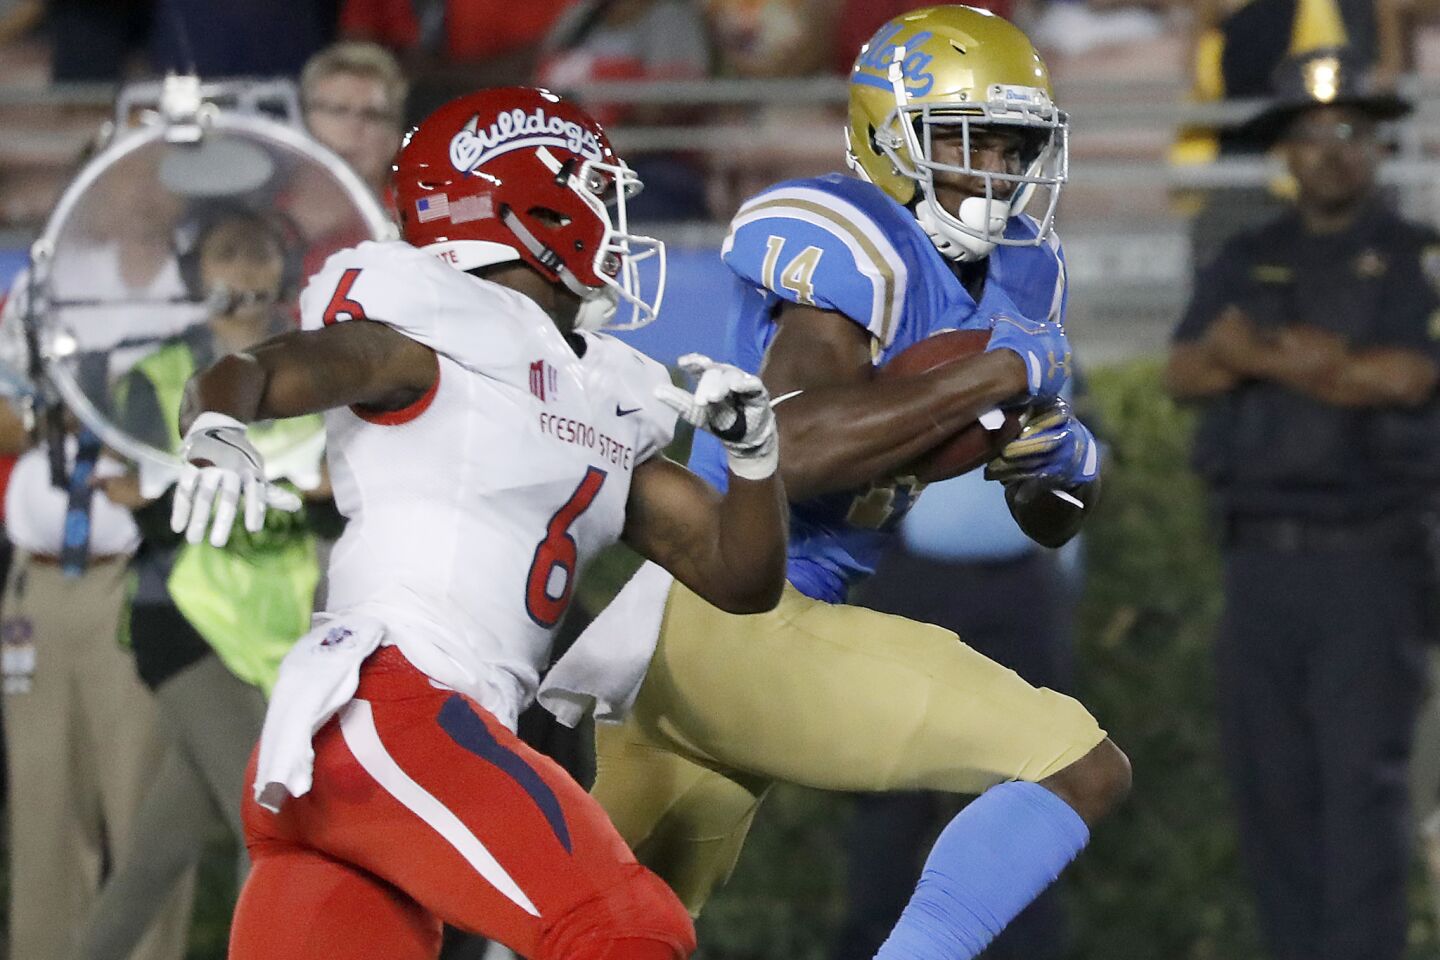 UCLA wide receiver Theo Howard breaks away for a touchdown after making catch in front of Fresno State defensive back Tank Kelly in the second quarter on Saturday.